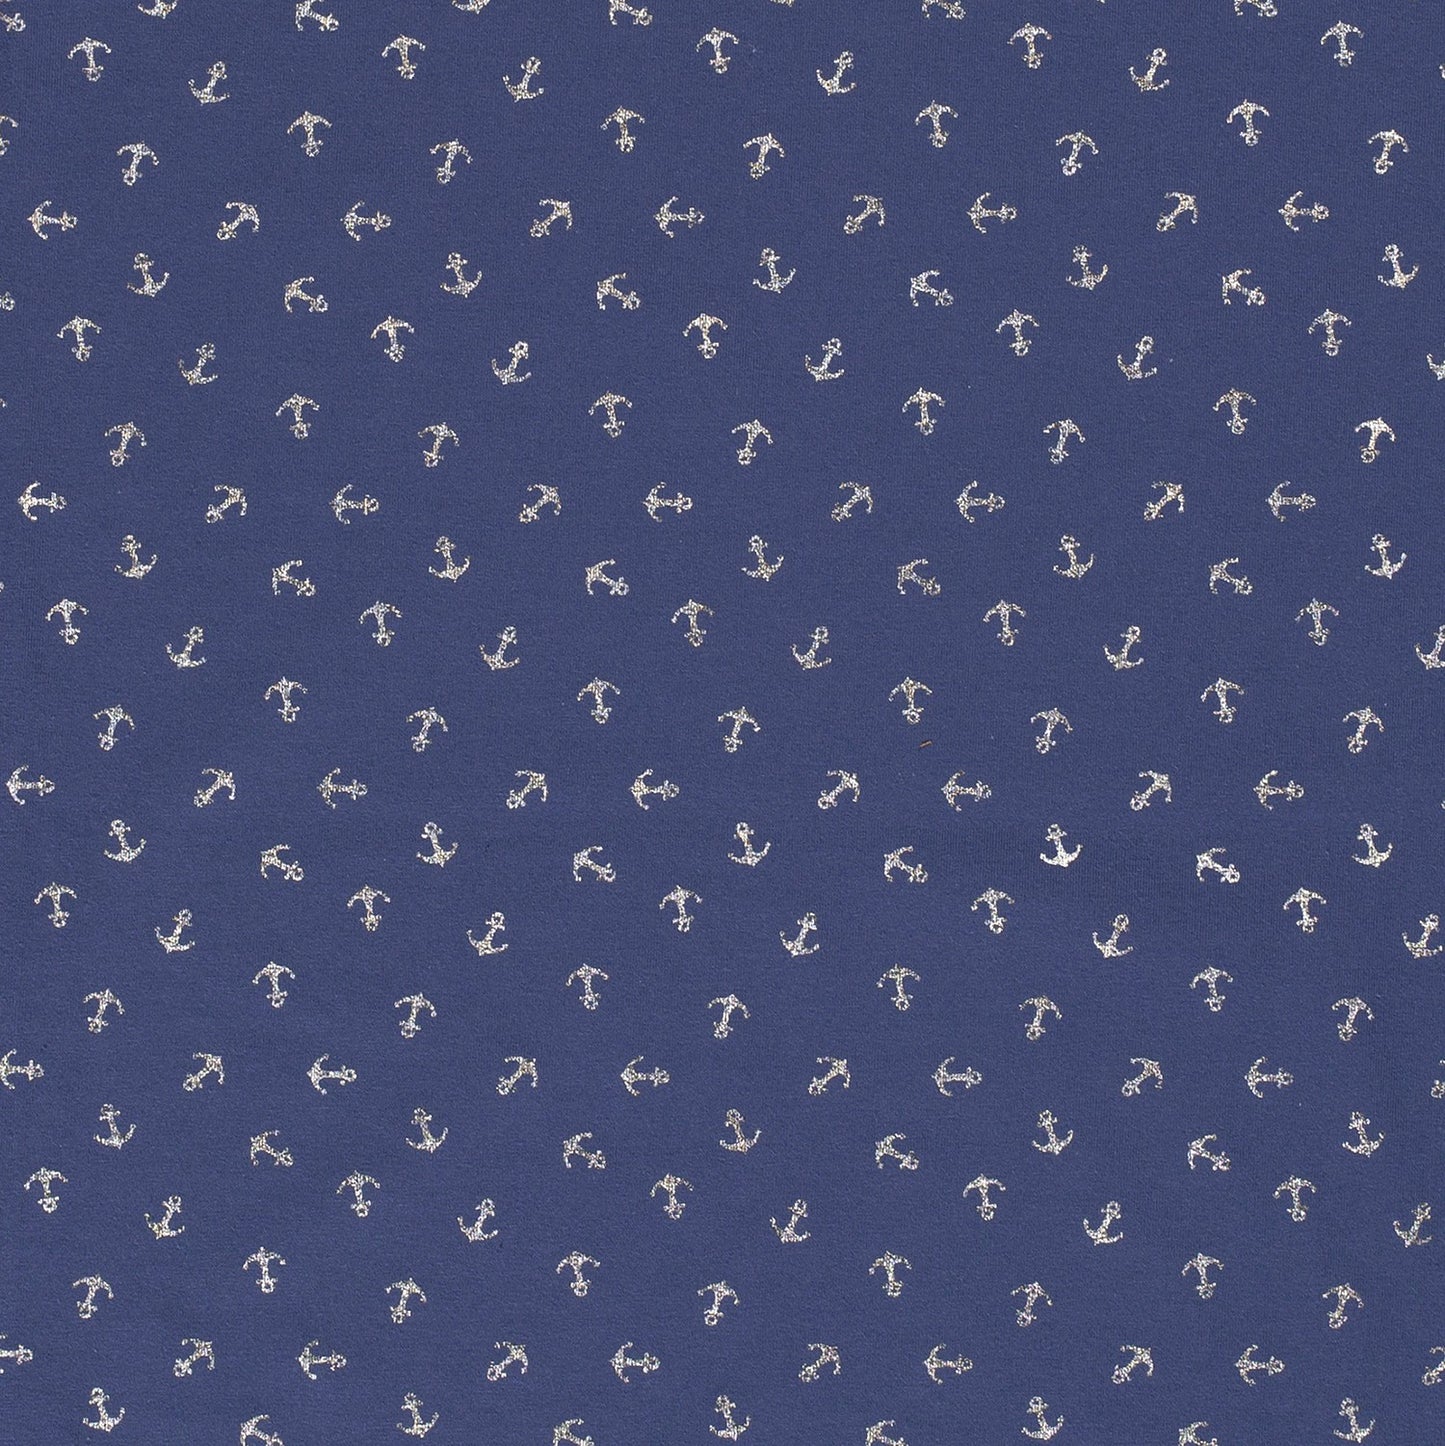 Anchors - Metallic Ink on Navy Base cloth - European Import Cotton Jersey Knit